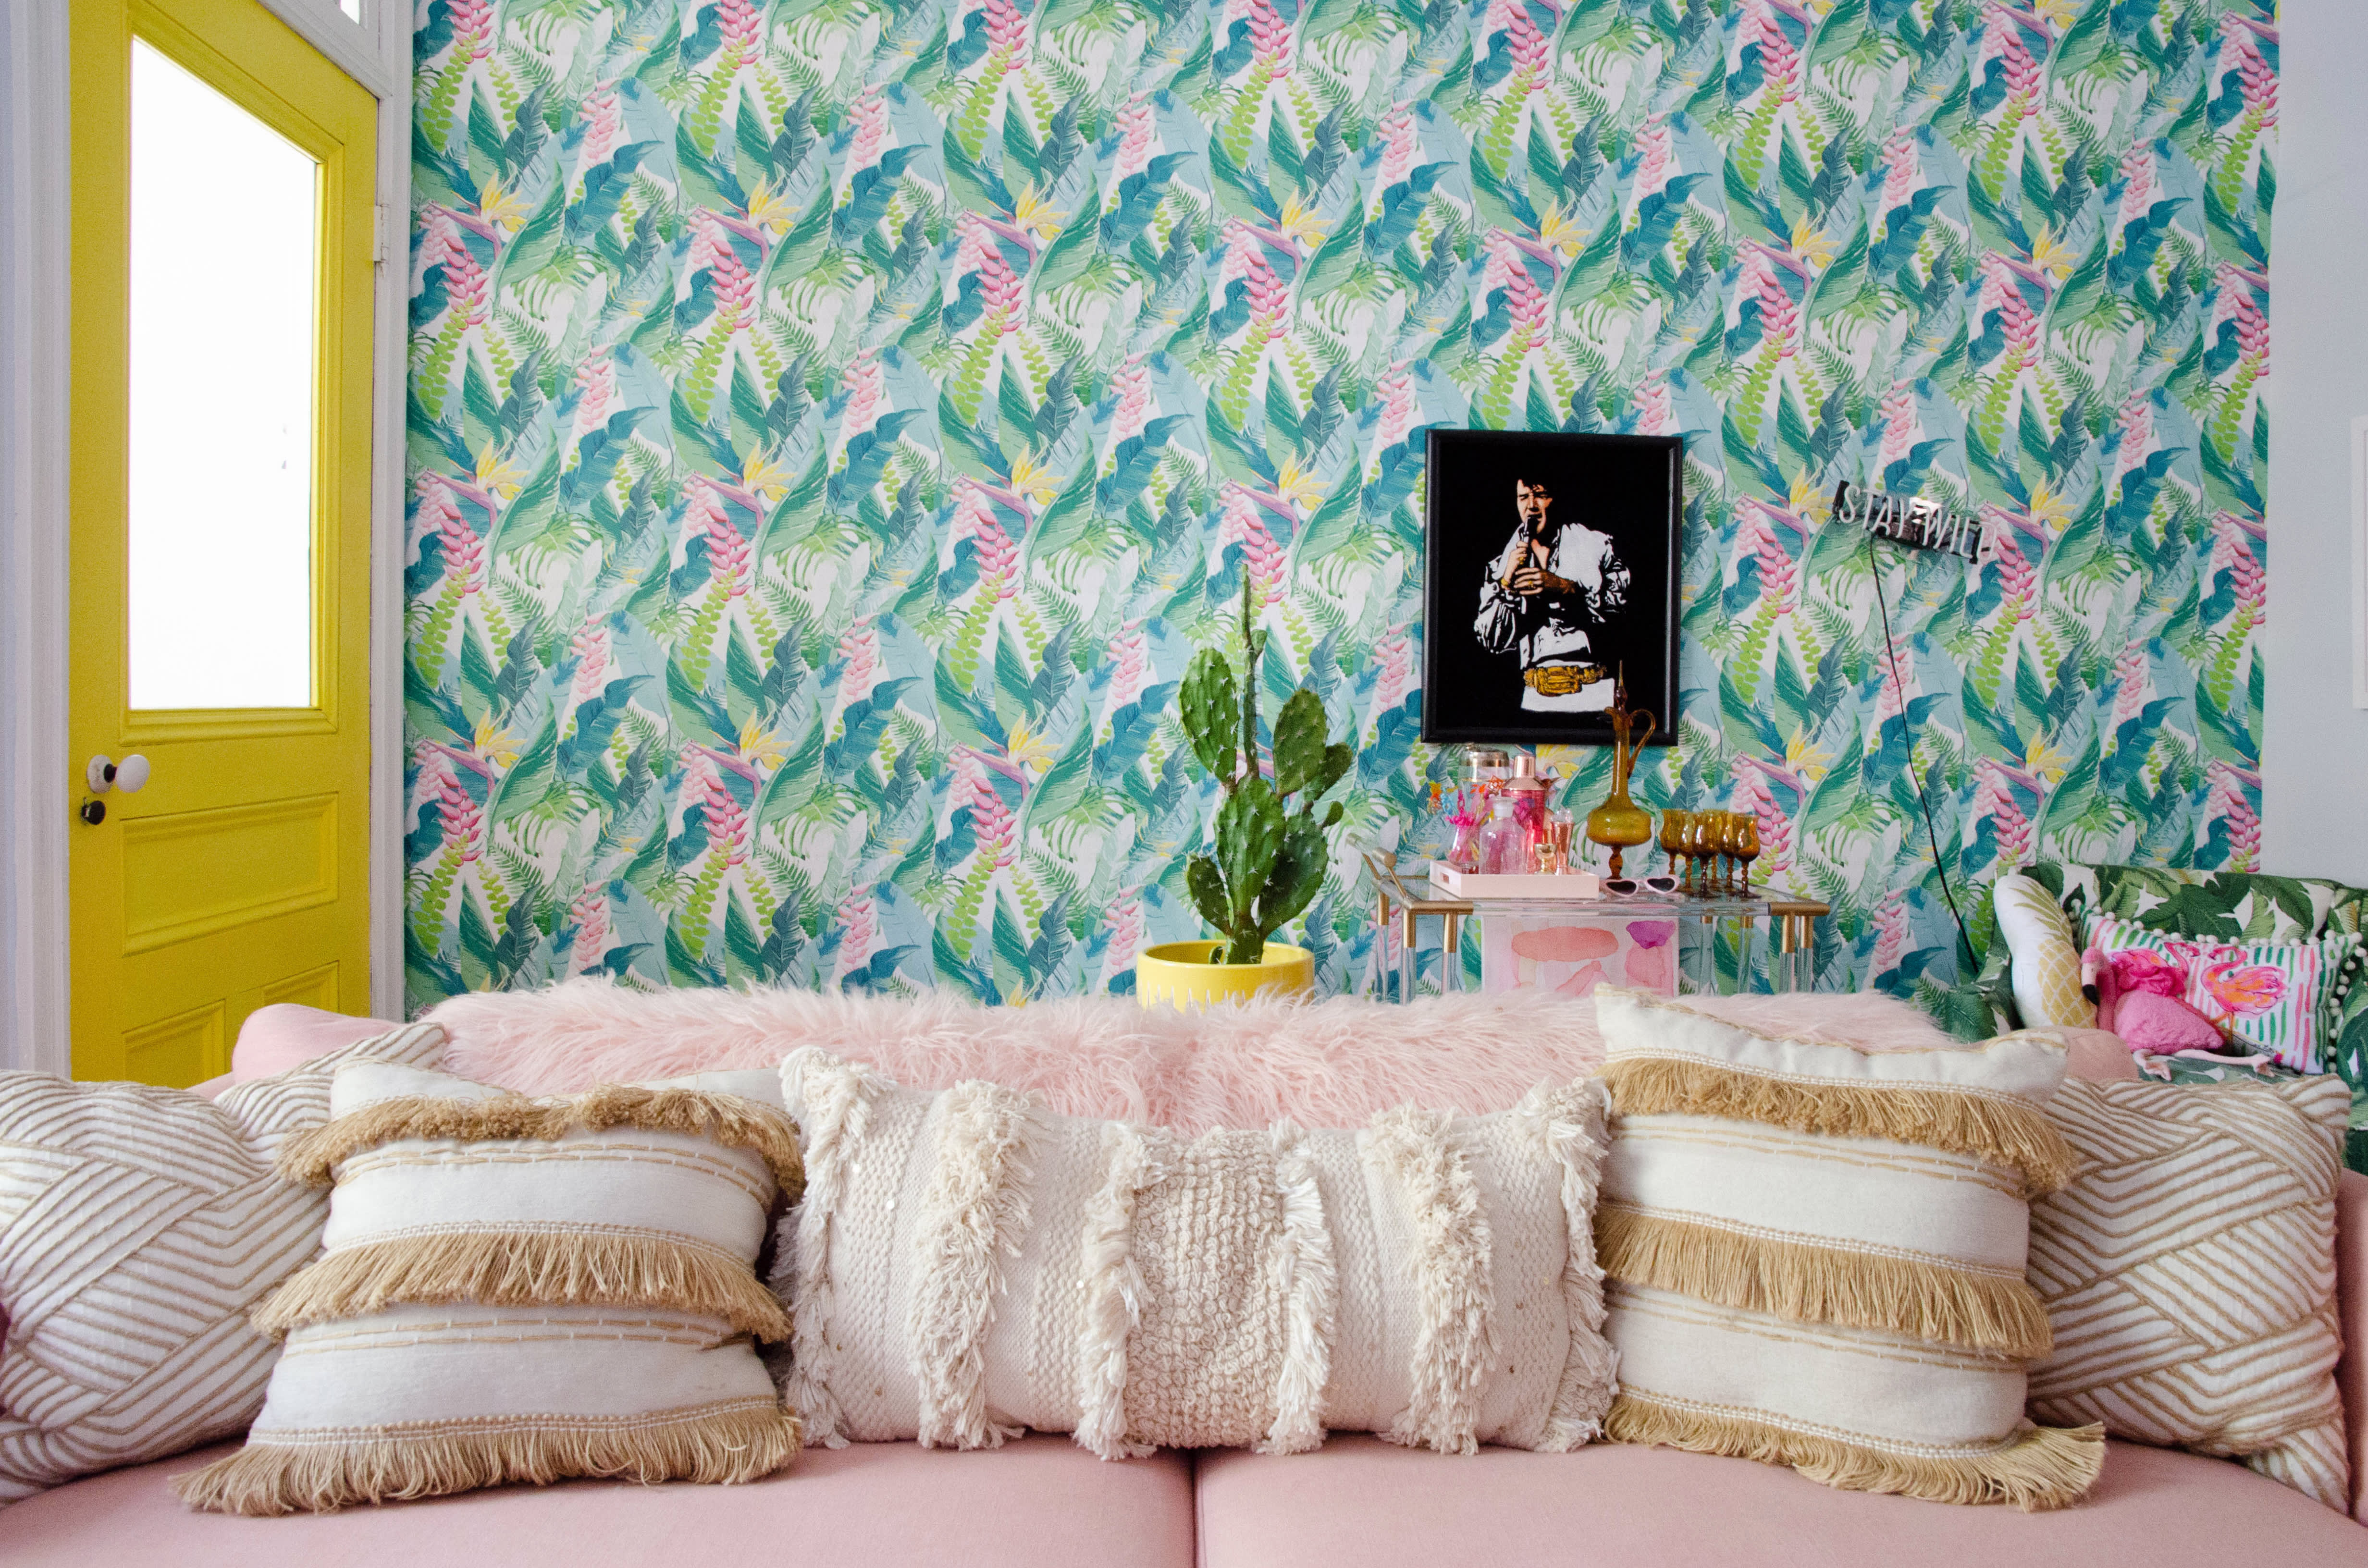 How to Cover Textured Walls With Stick-On Vinyl Wallpaper